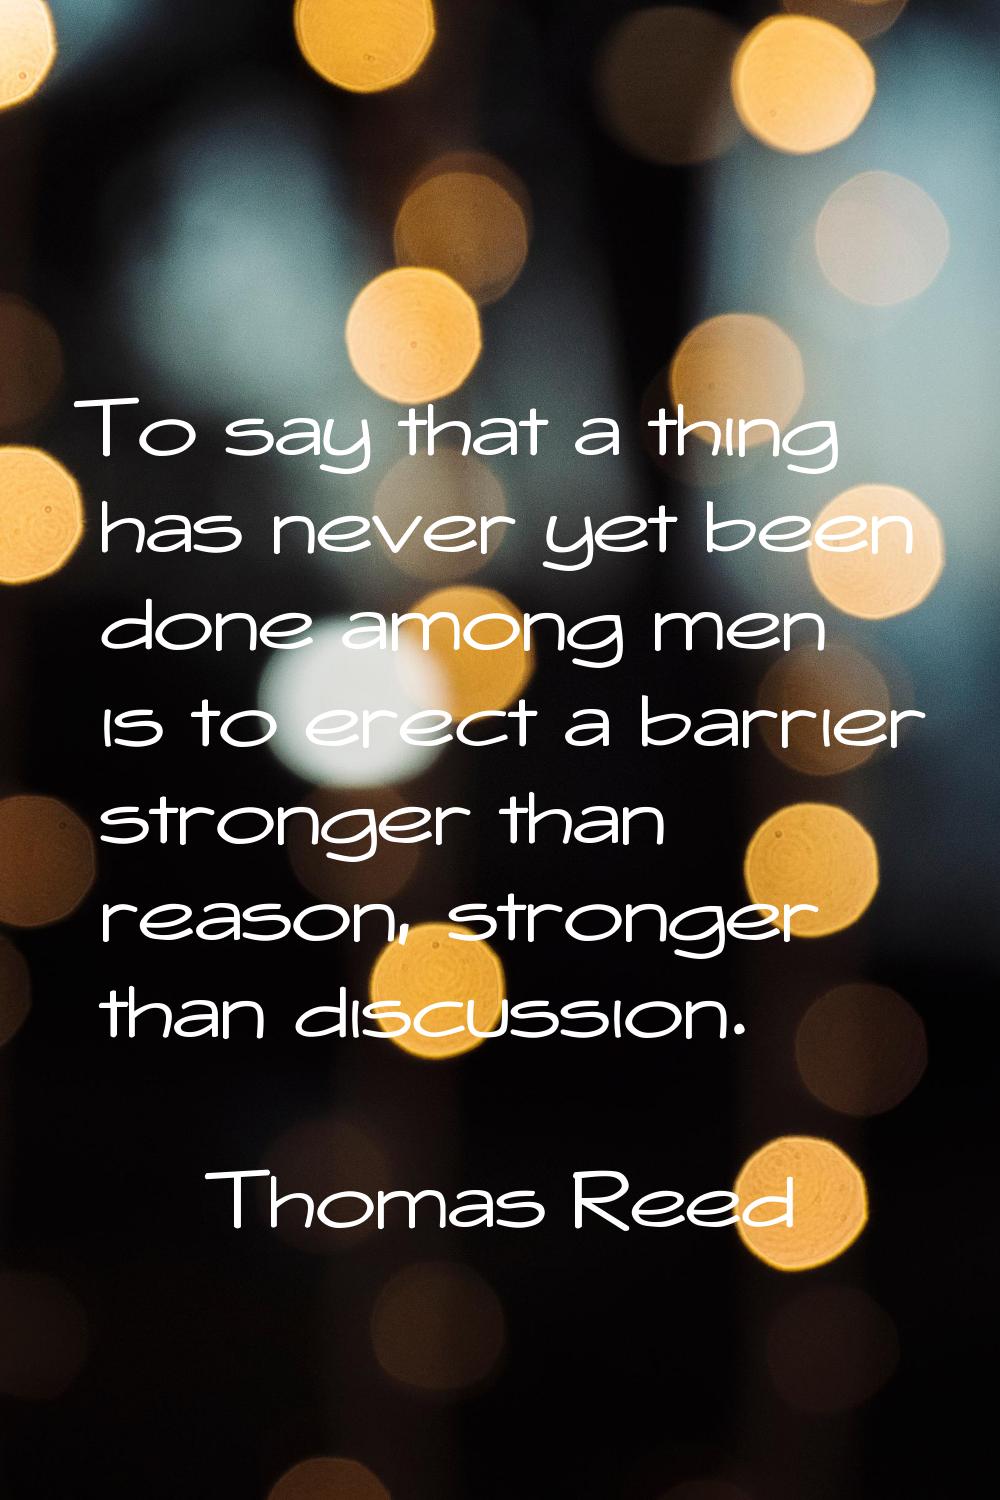 To say that a thing has never yet been done among men is to erect a barrier stronger than reason, s